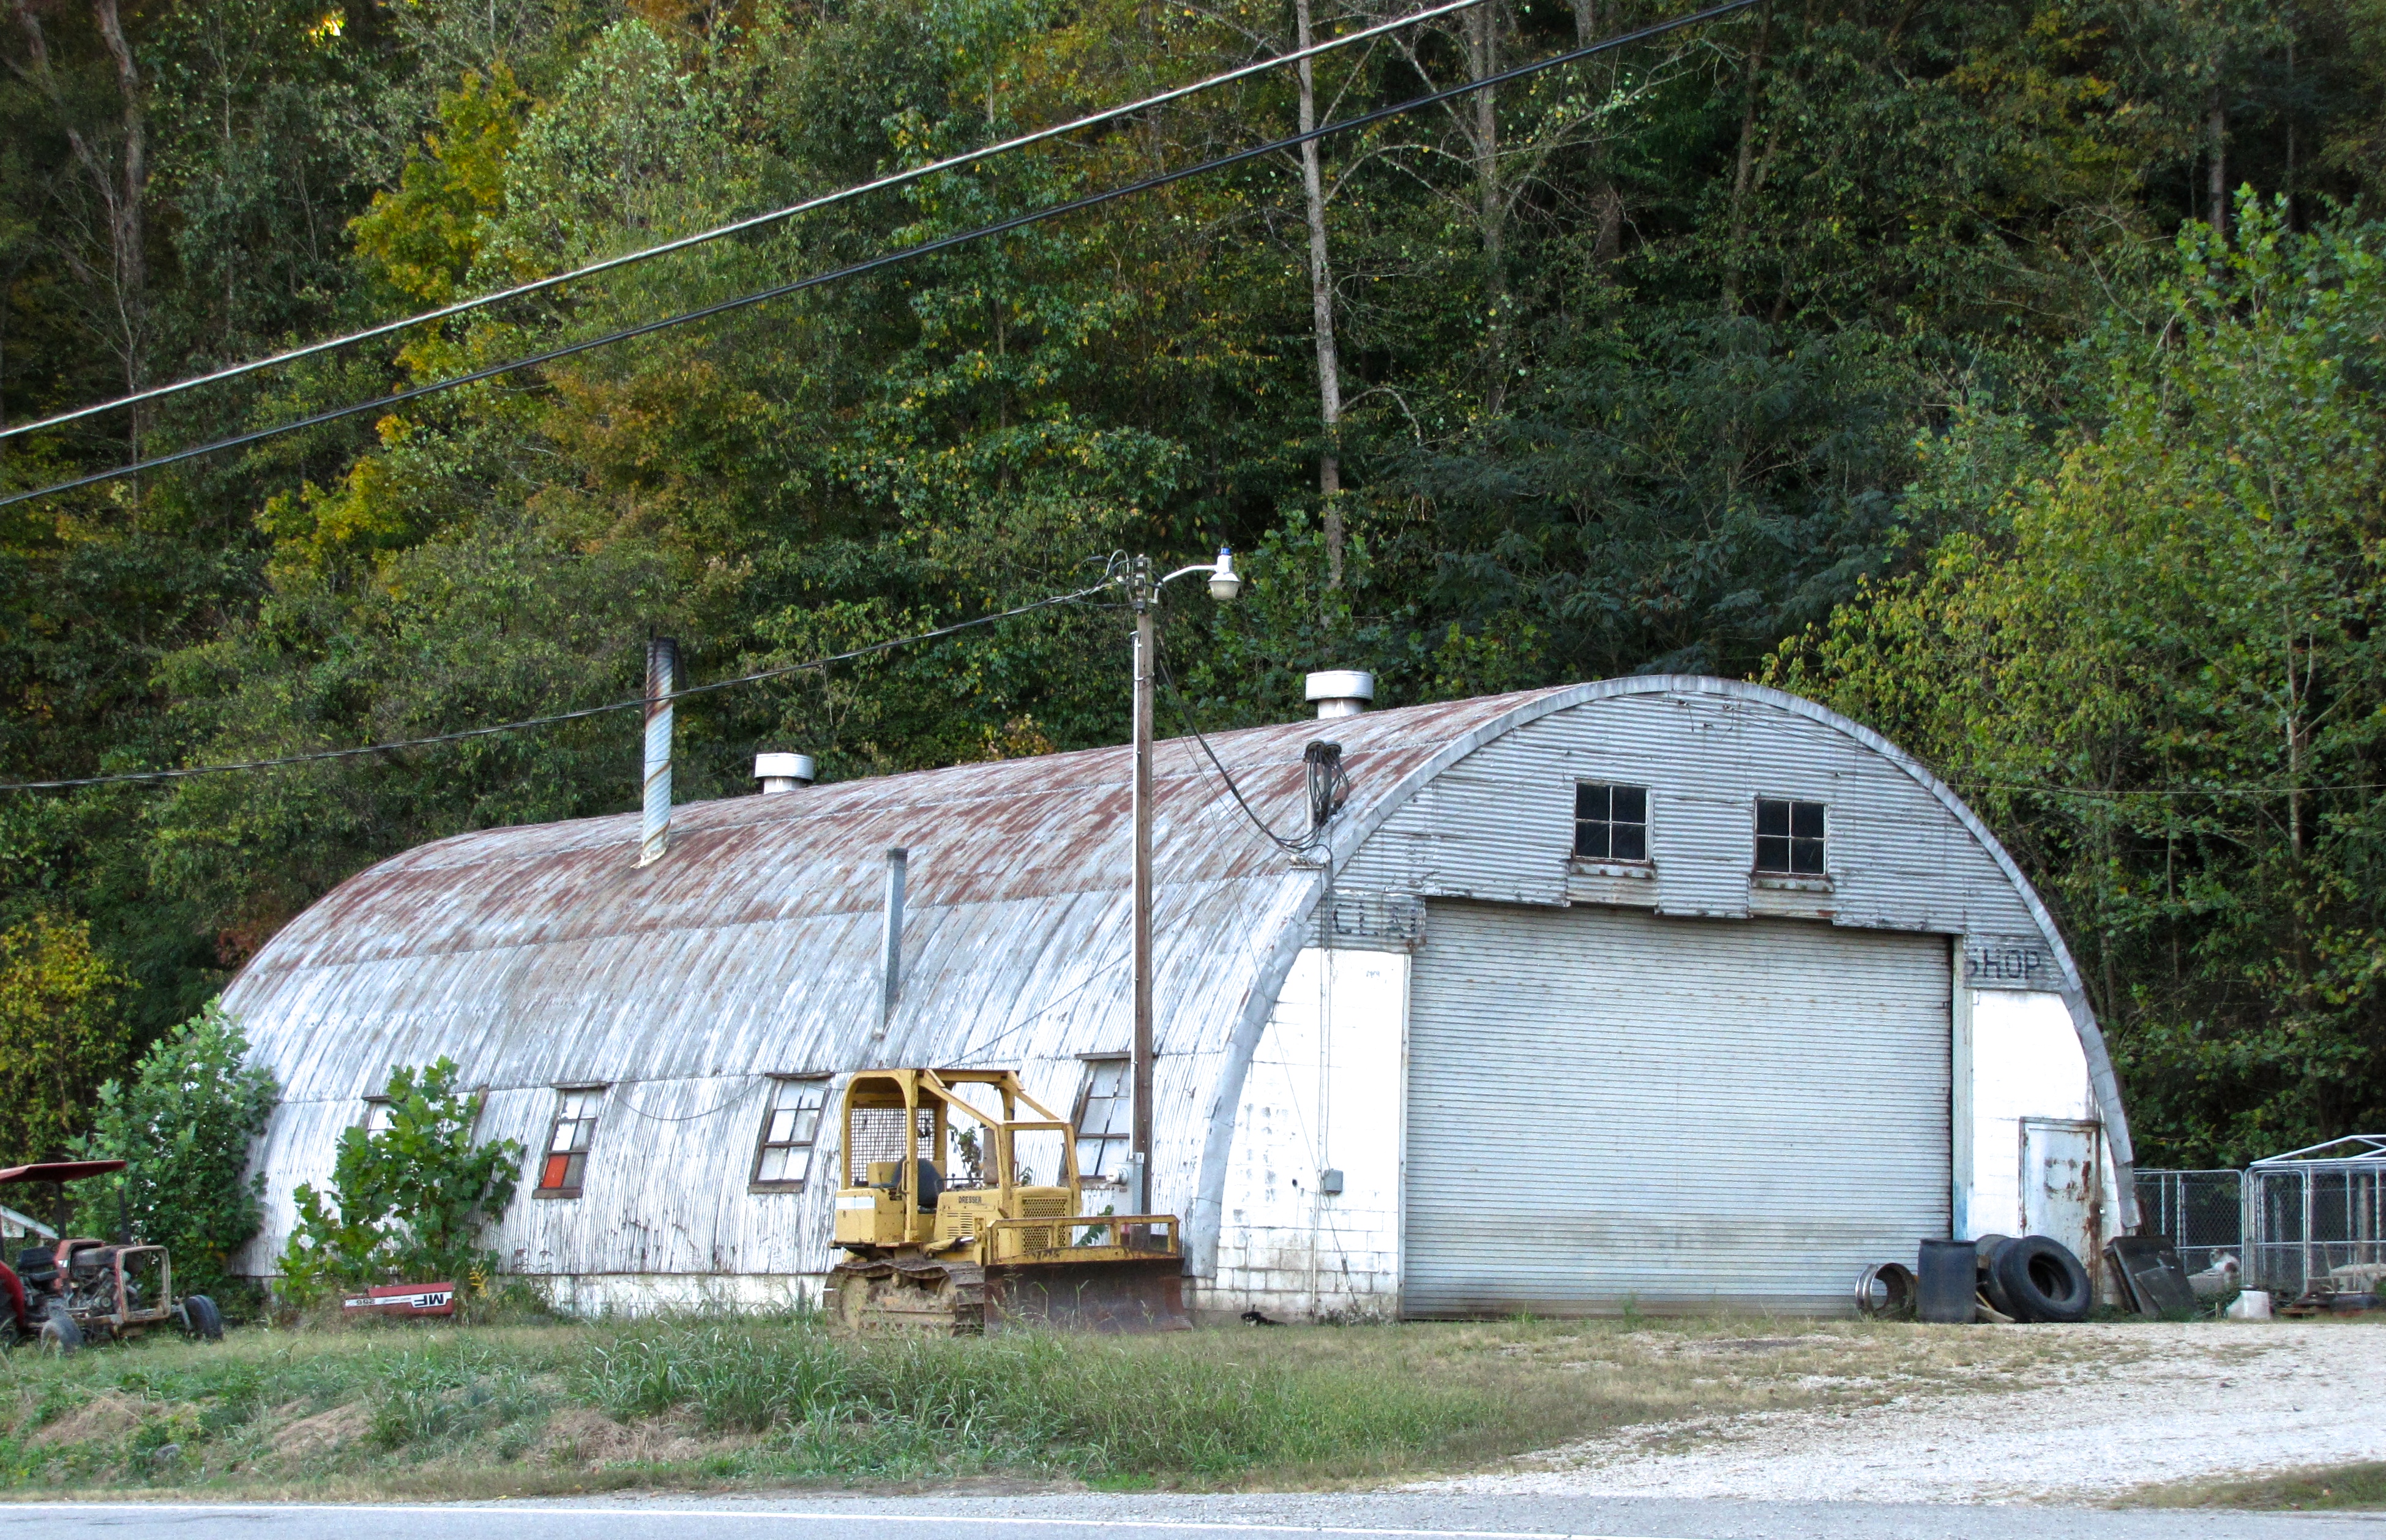 quonset hut in Jeffersontown, KY